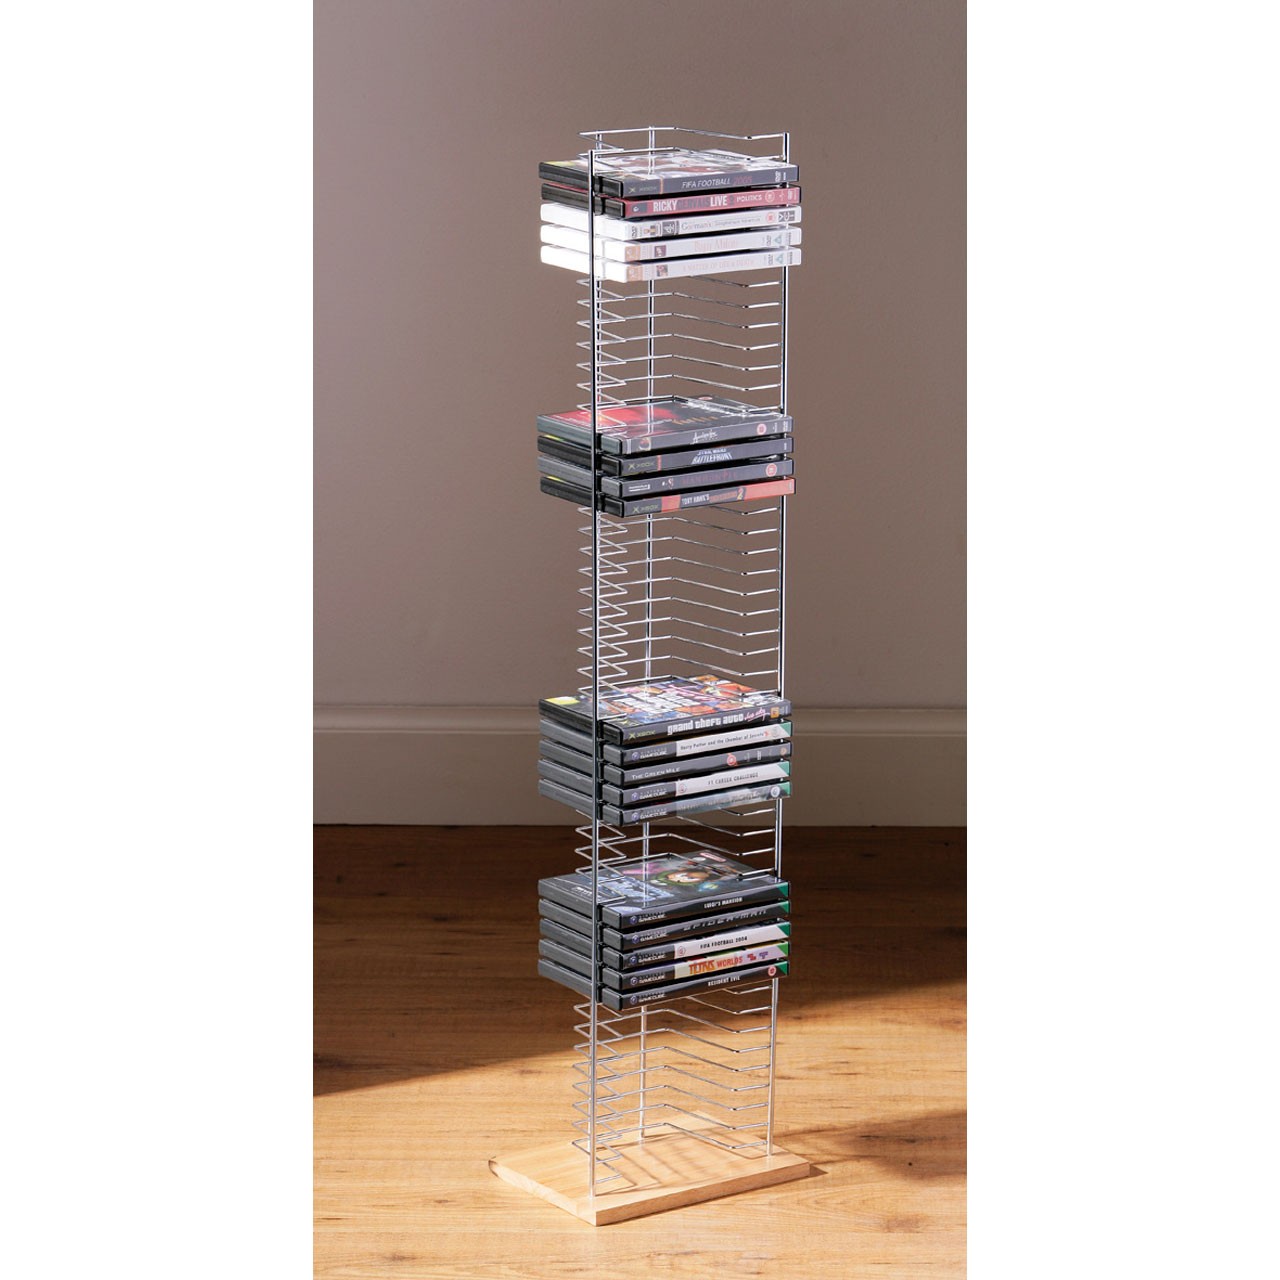 Wood base dvd rack tower chrome holds up to 50